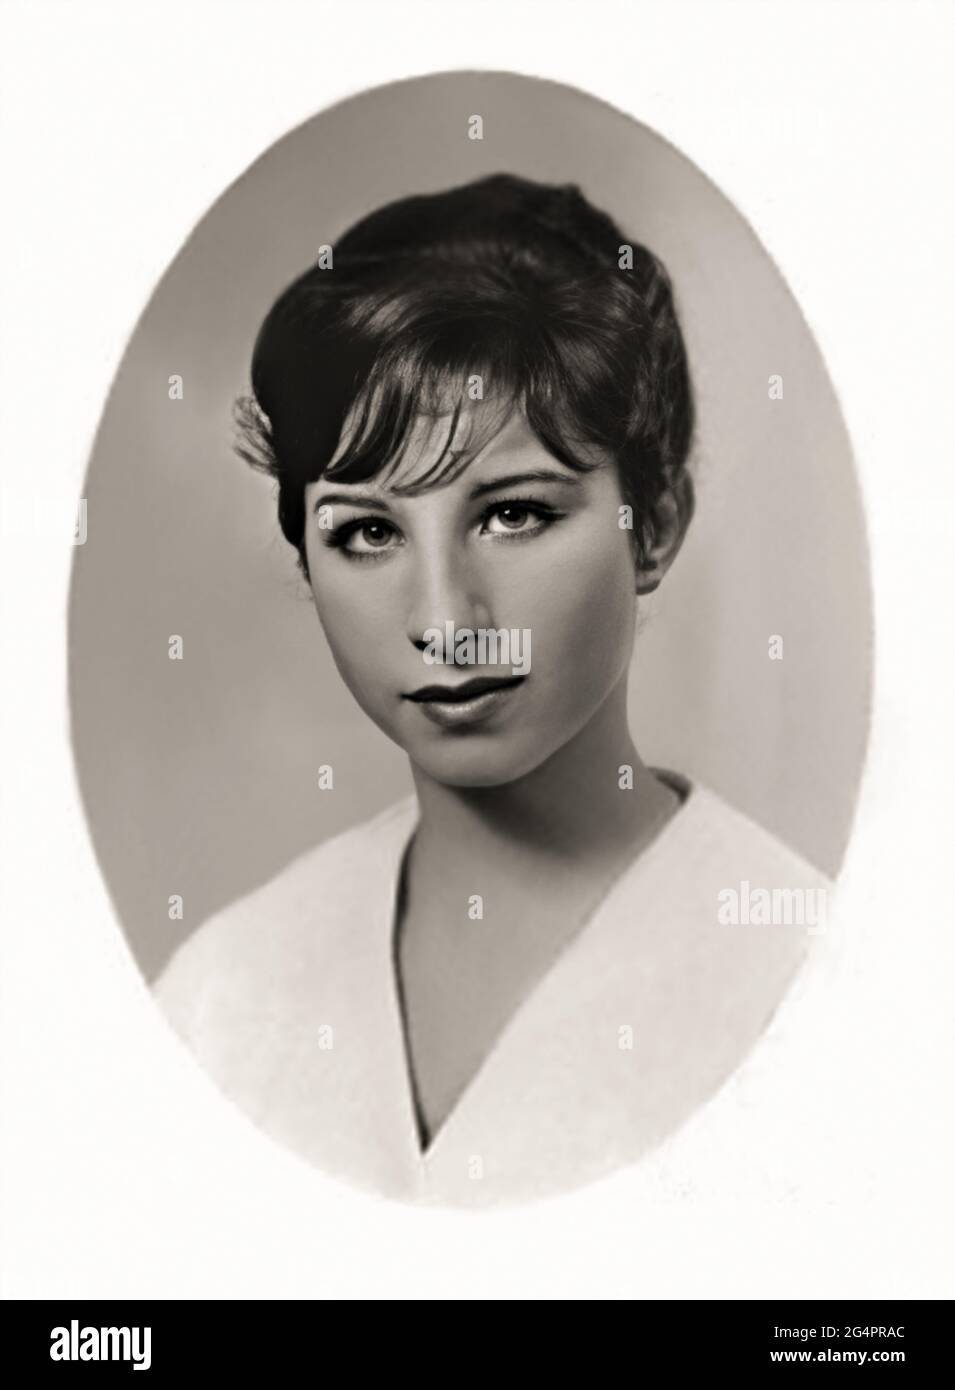 1959 c., USA : The celebrated american singer BARBRA STREISAND ( born in 1942 ) when was a young girl aged 17 from his High-School Yearbook . Unknown photographer. - HISTORY - FOTO STORICHE - personalità da giovane giovani - ragazza - personality personalities when was young girl - INFANZIA - CHILDHOOD - POP MUSIC - MUSICA - cantante --- ARCHIVIO GBB Stock Photo